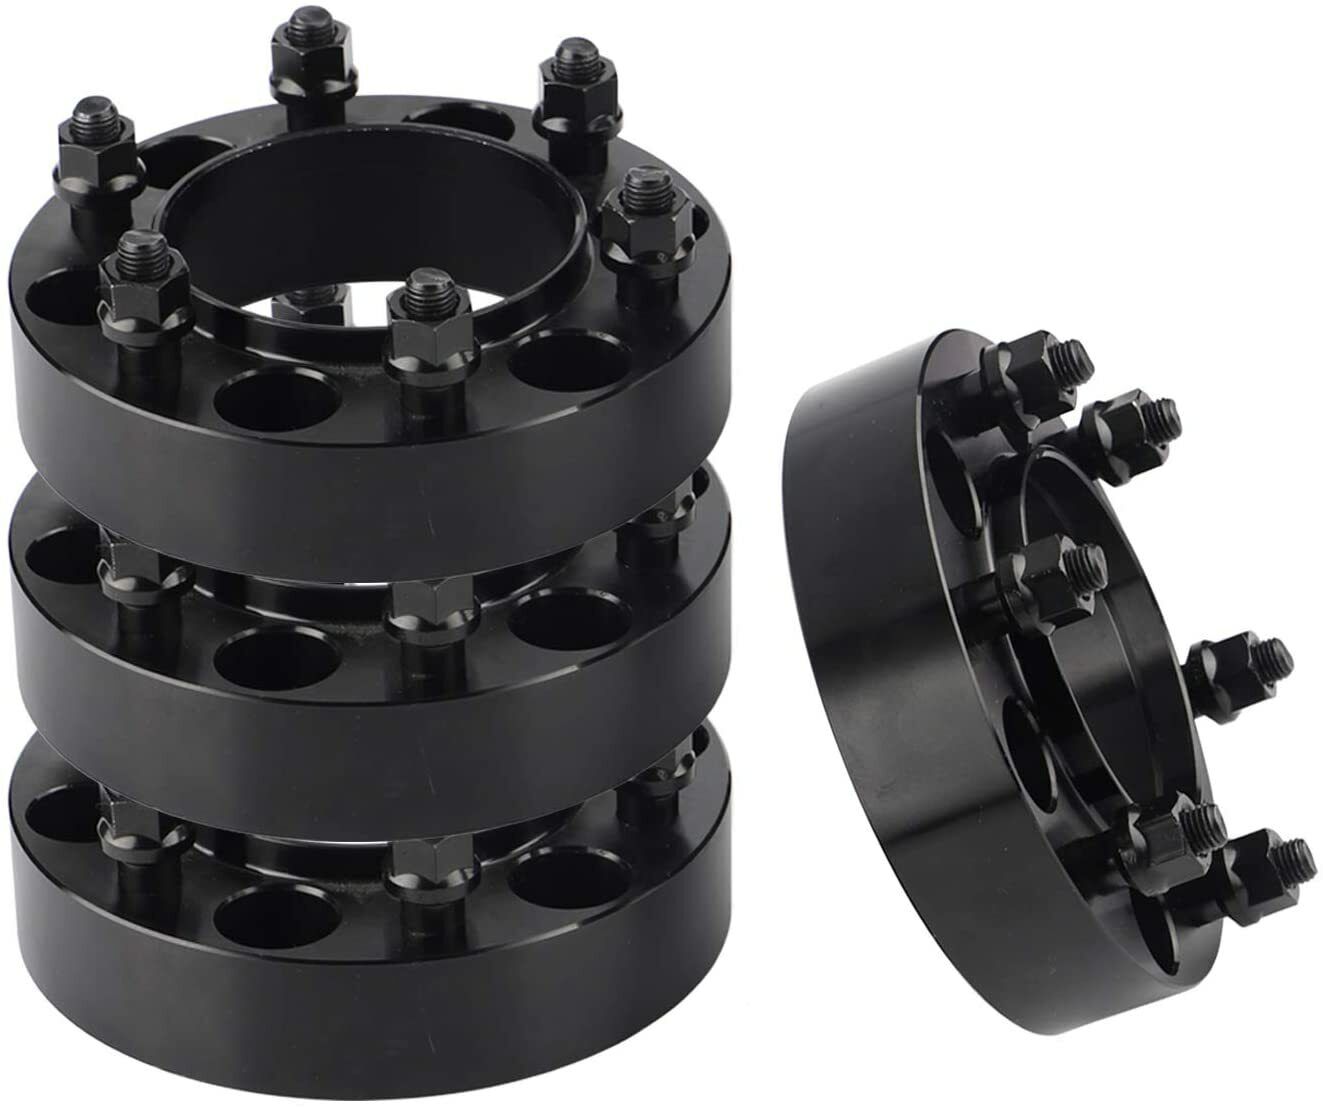 6x5.5 Hub Centric 1.25 inch Wheel Spacers For Toyota 4Runner Tacoma FJ Cruiser